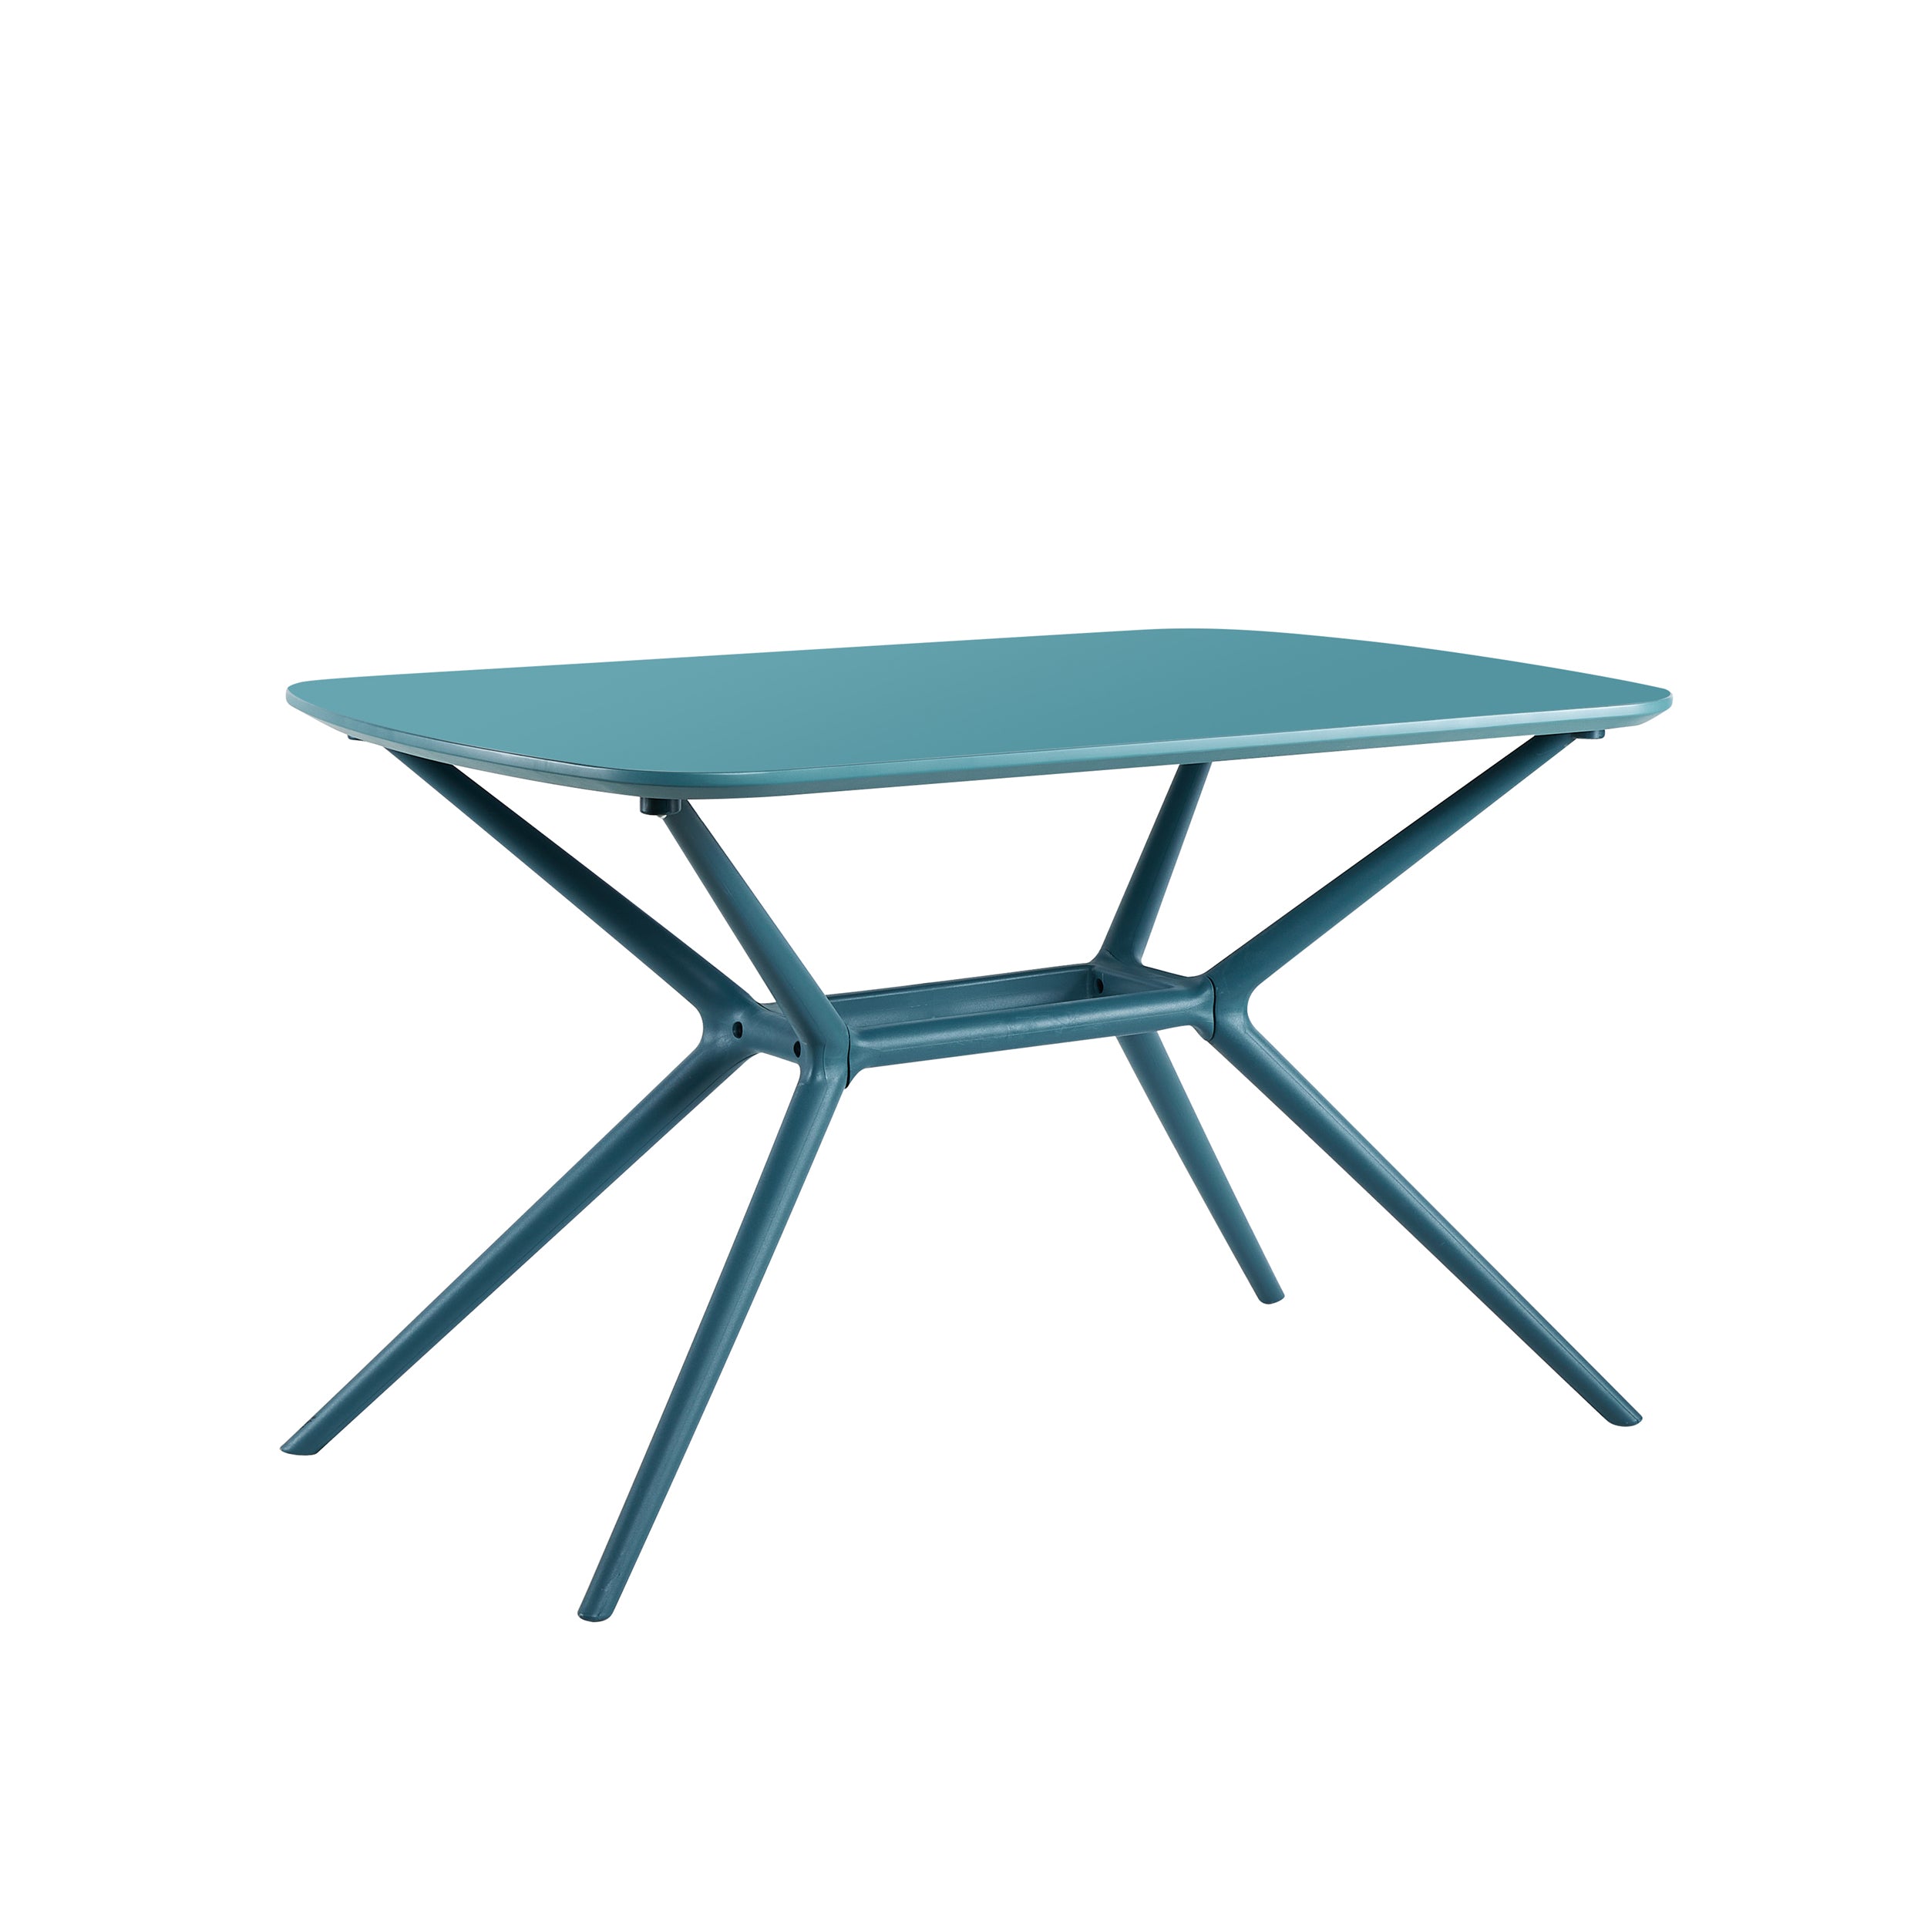 Dande Dining Table - Teal